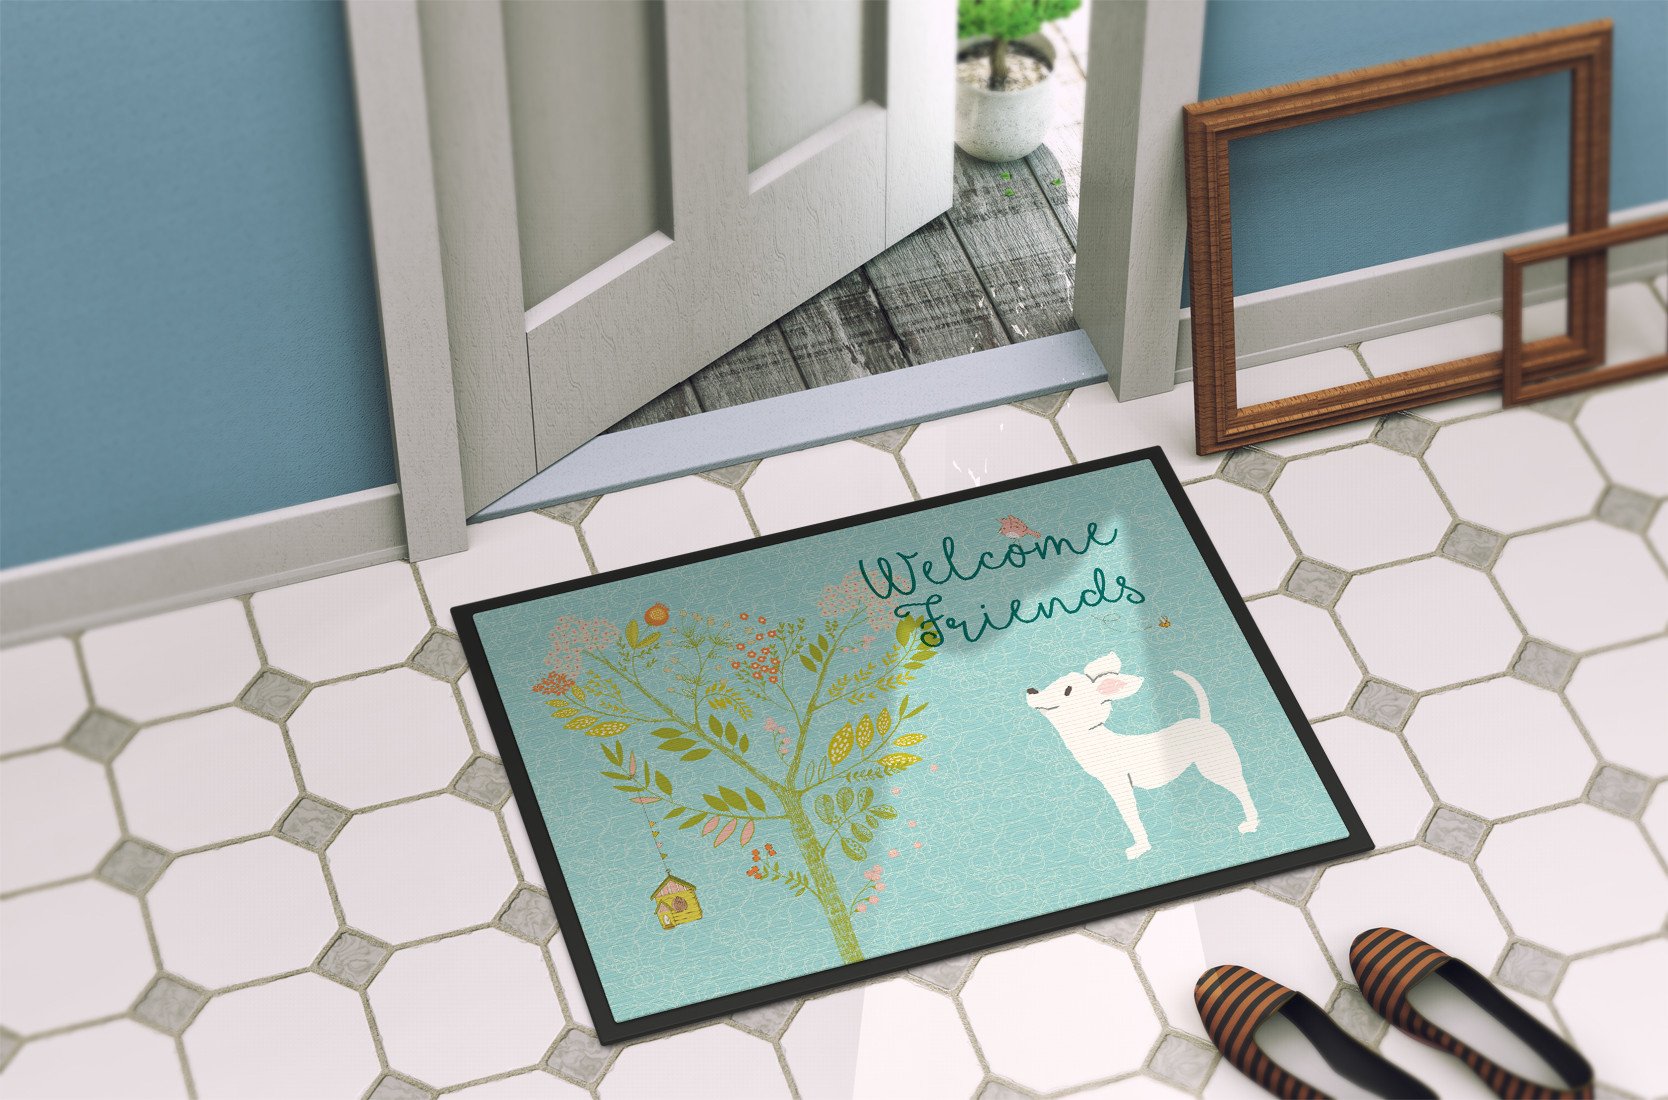 Welcome Friends White Chihuahua Indoor or Outdoor Mat 24x36 BB7629JMAT by Caroline's Treasures